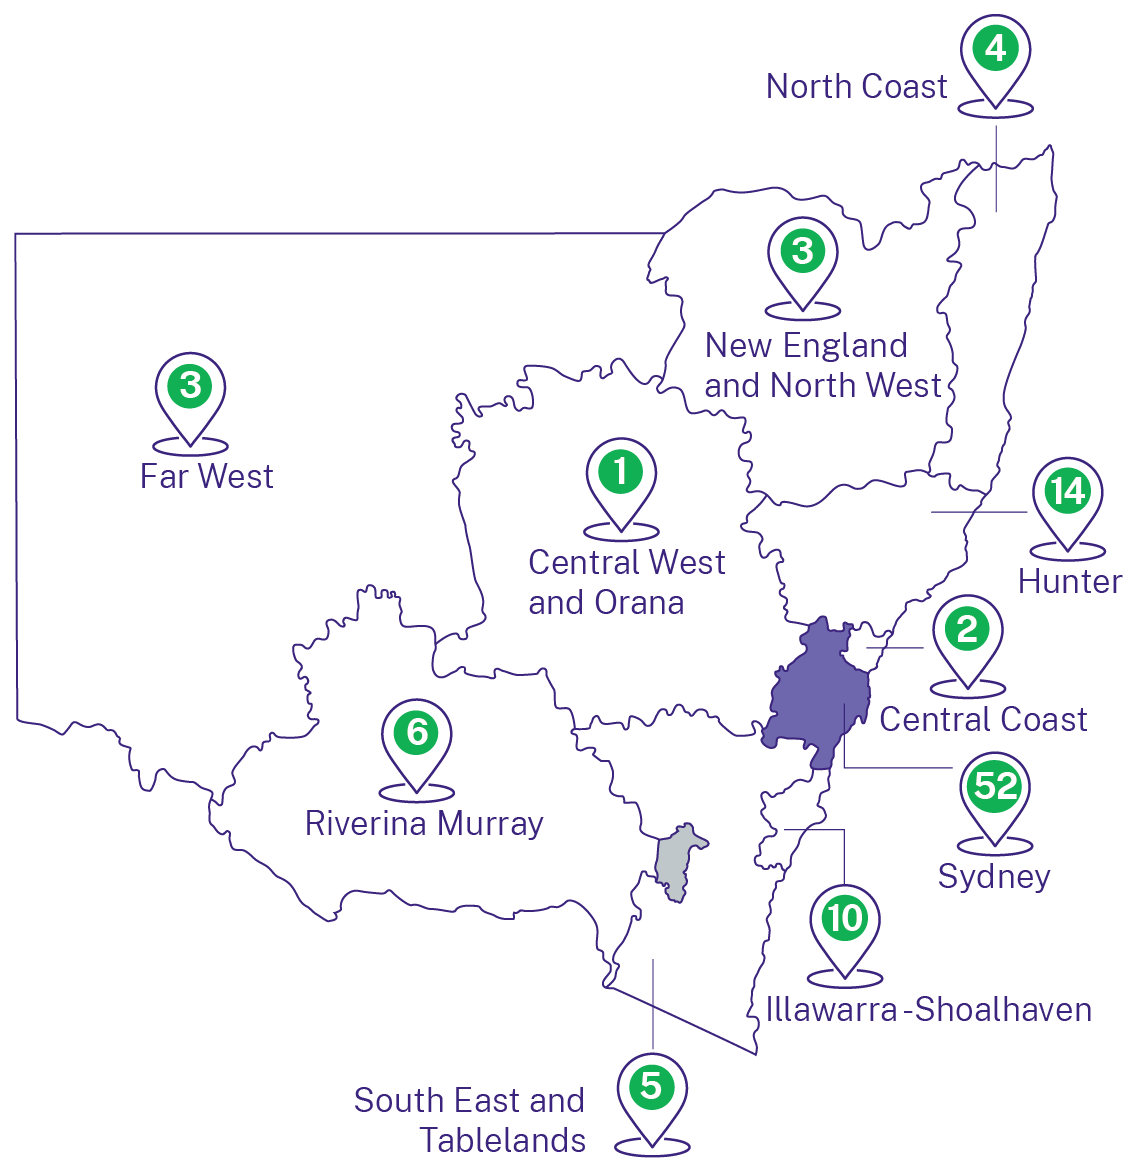 The public preschool commitment for each region in NSW is 2 for Central Coast, 1 for Central West and Orana, 3 for Far West, 14 for Hunter, 10 for Illawarra-Shoalhaven, 3 for New England and North West, 4 for North Coast, 6 for Riverina Murray and 5 for South East and Tablelands